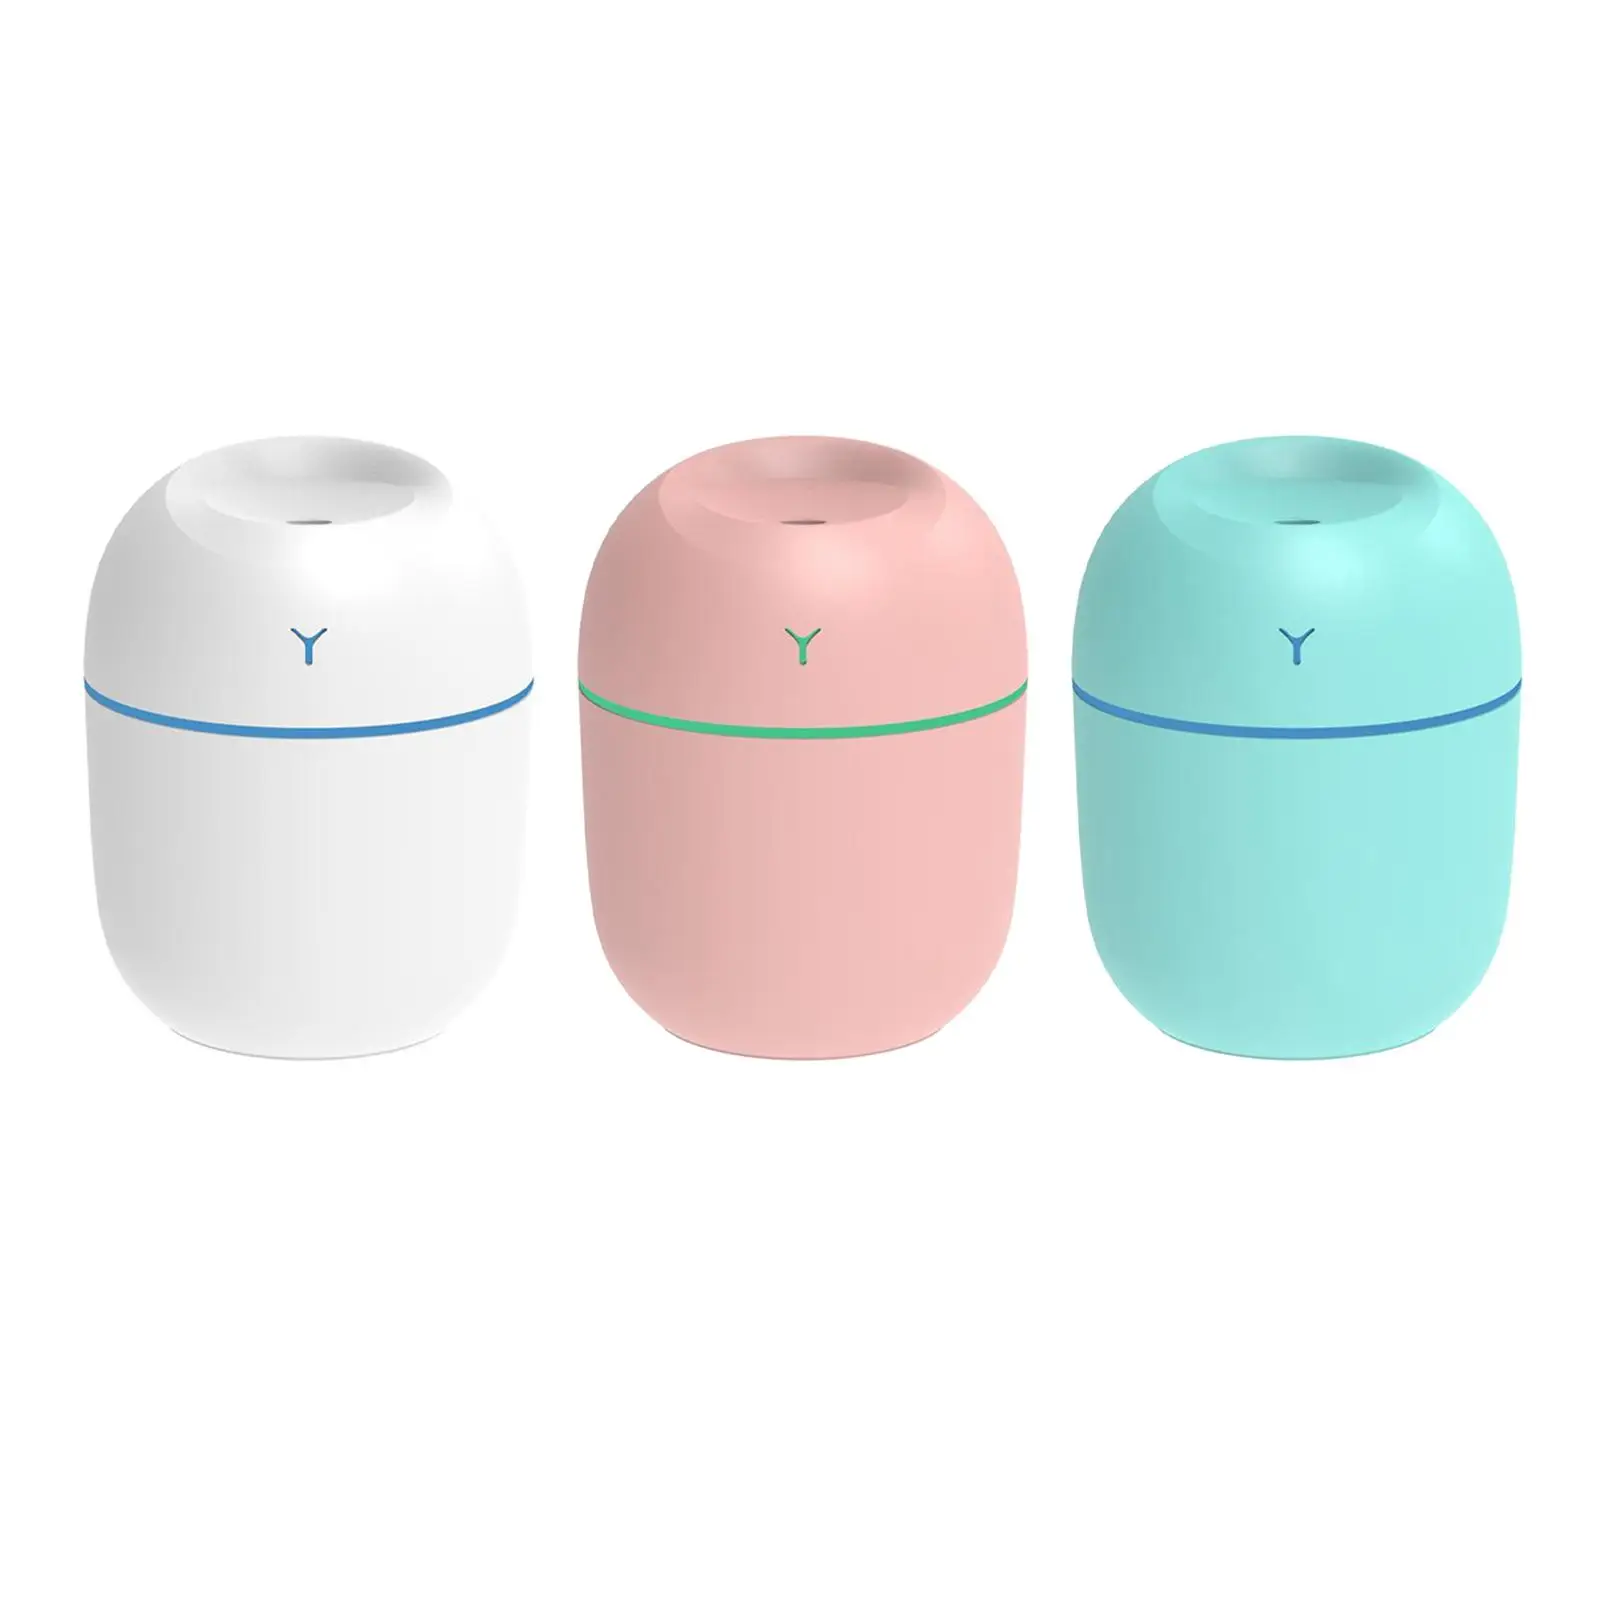 

Tabletop Humidifier Portable Auto Shut Off 1 Mist Modes Air Purifier with LED Night Lamp for Kids Room Office Yoga Dorms Travel